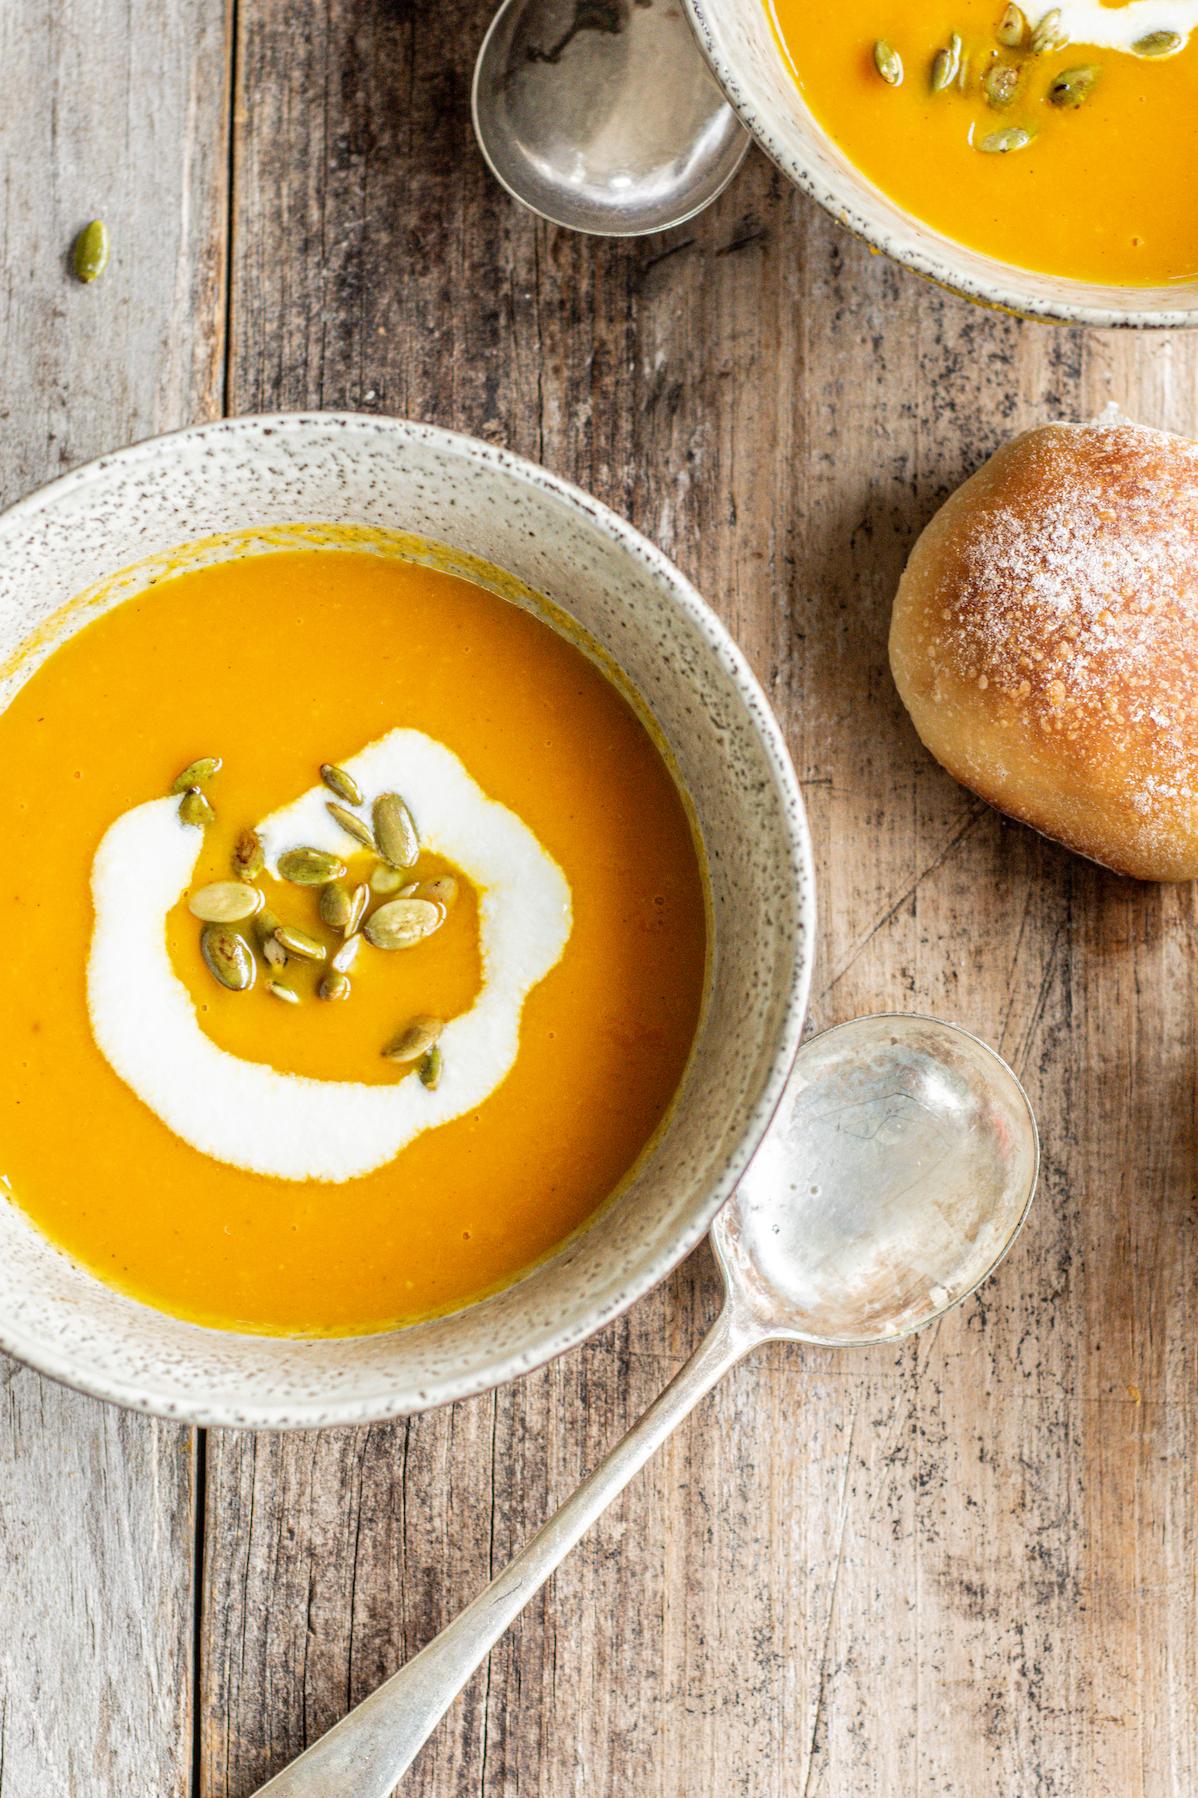  This soup is a one-pot wonder that's easy to make and tasty to eat